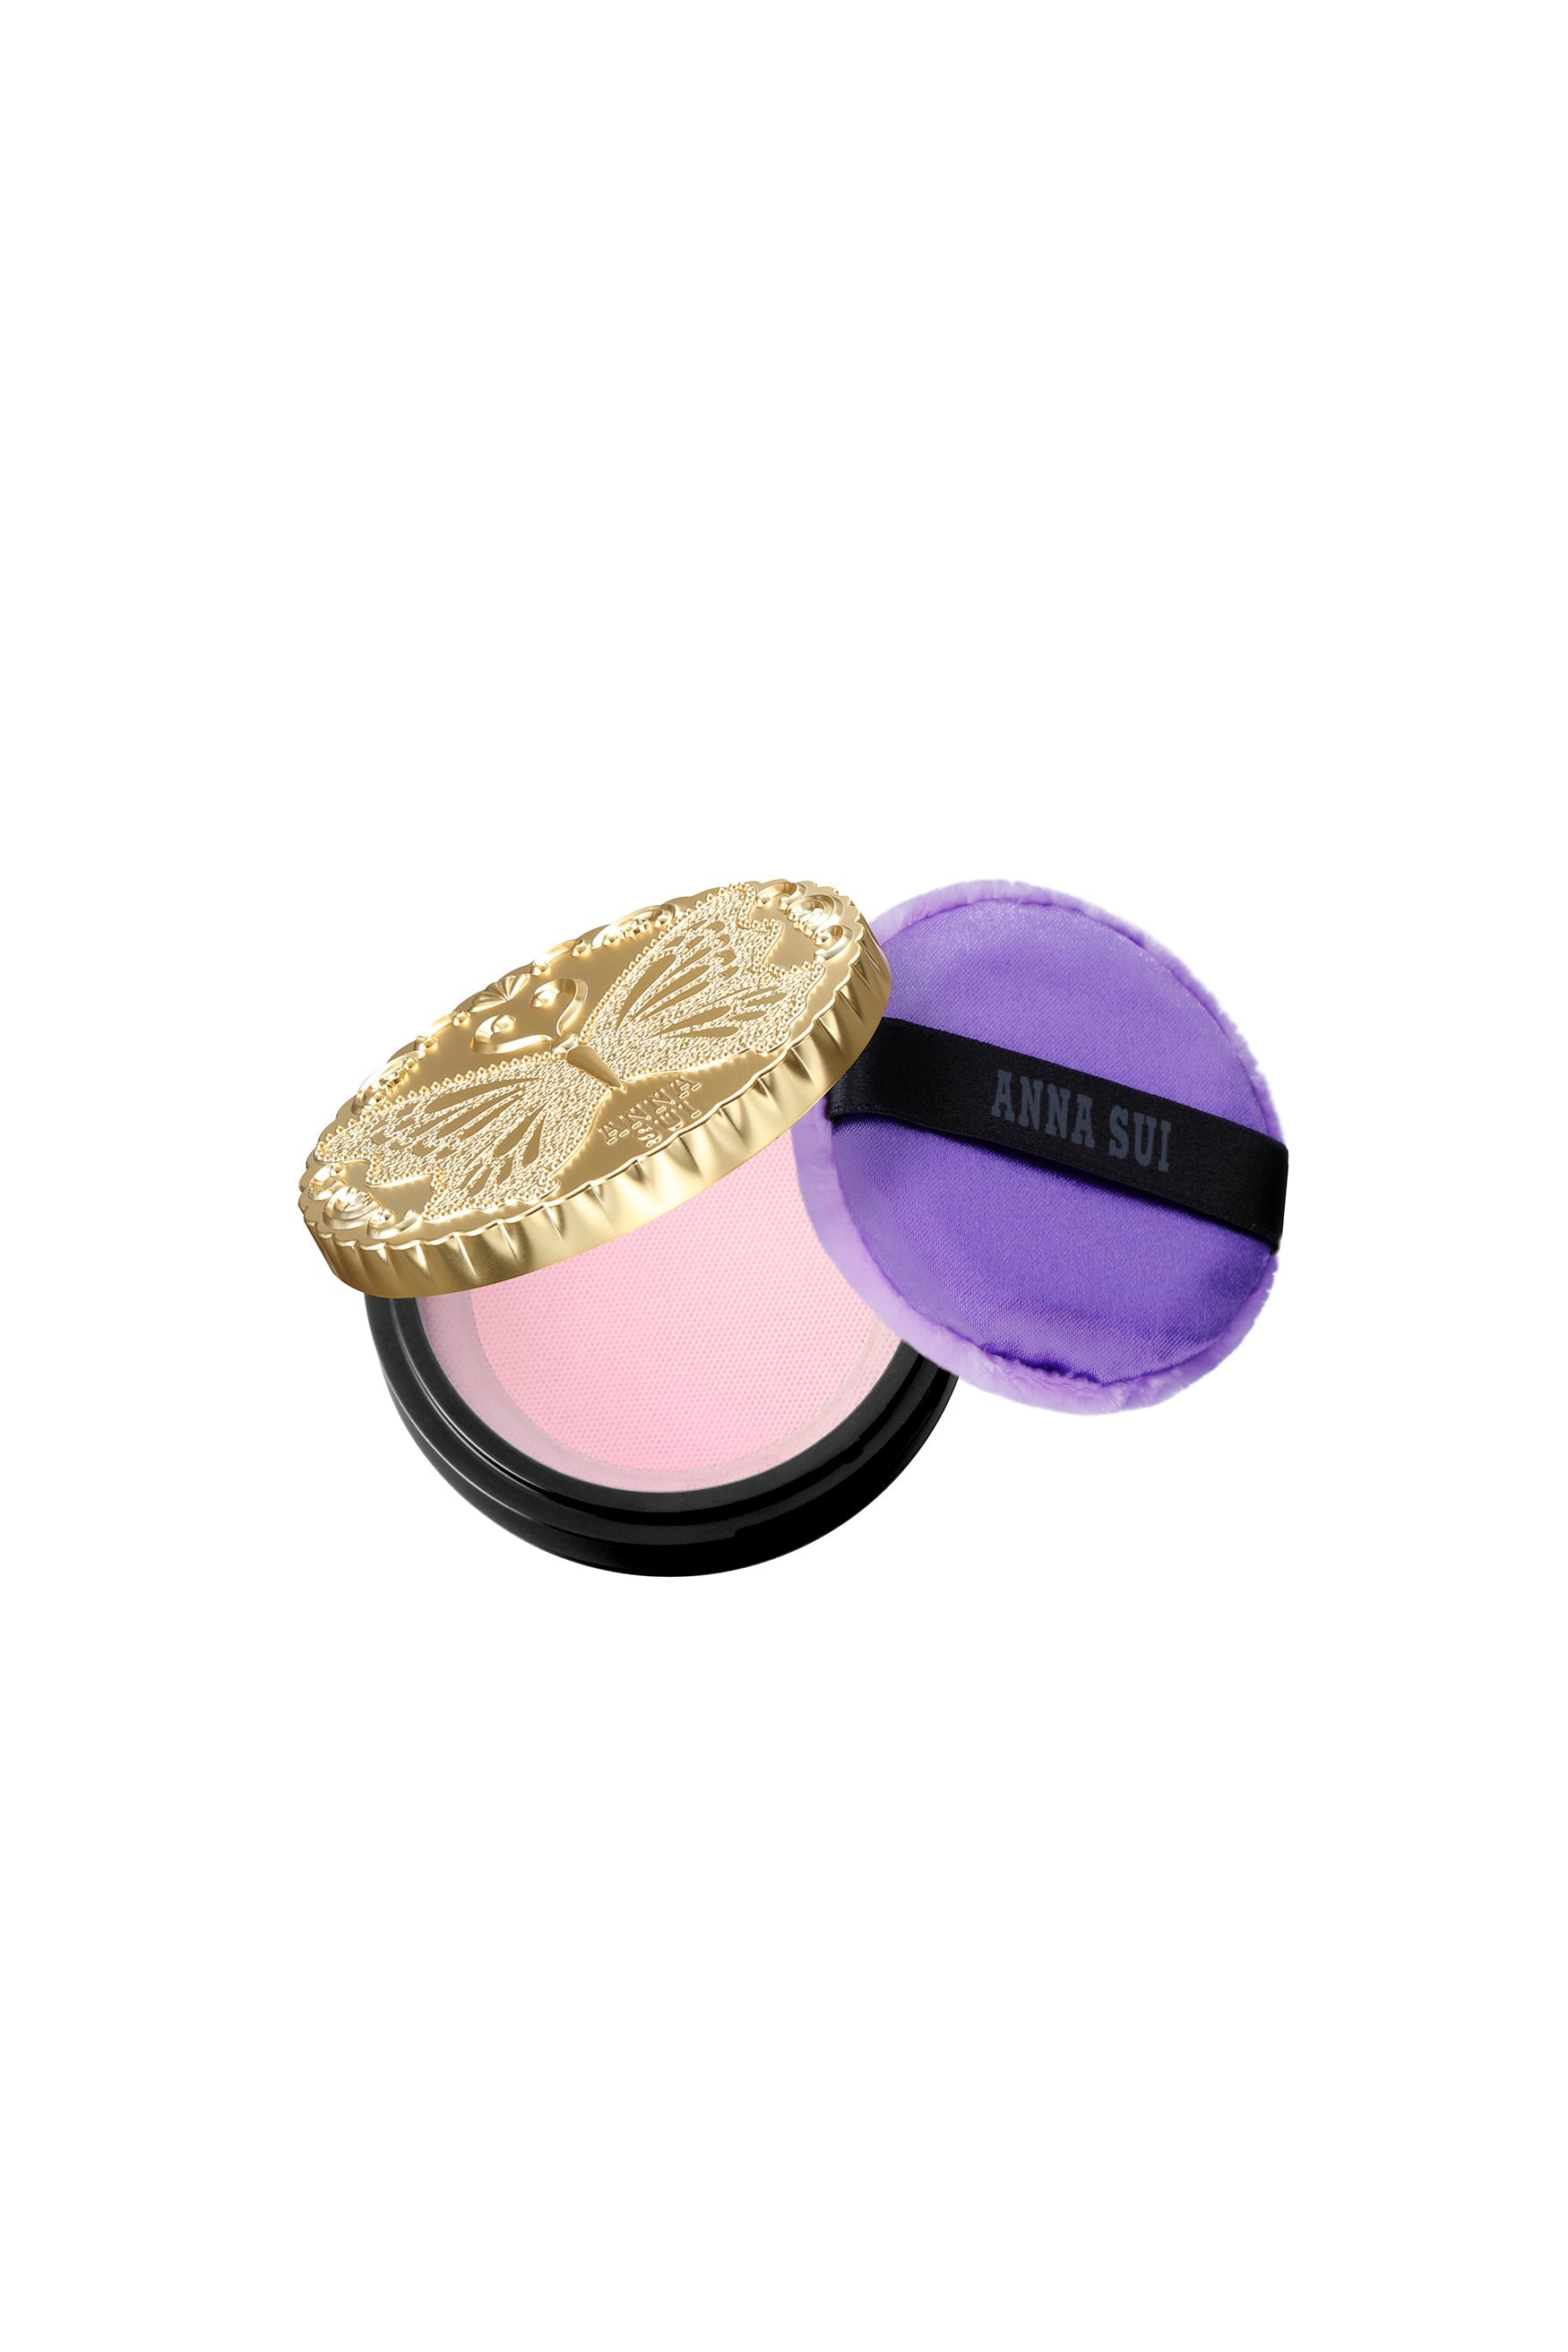 The Classic Loose Powder is a gold round box with a butterfly engrave on top, with CASE + 300: powder, and sponge